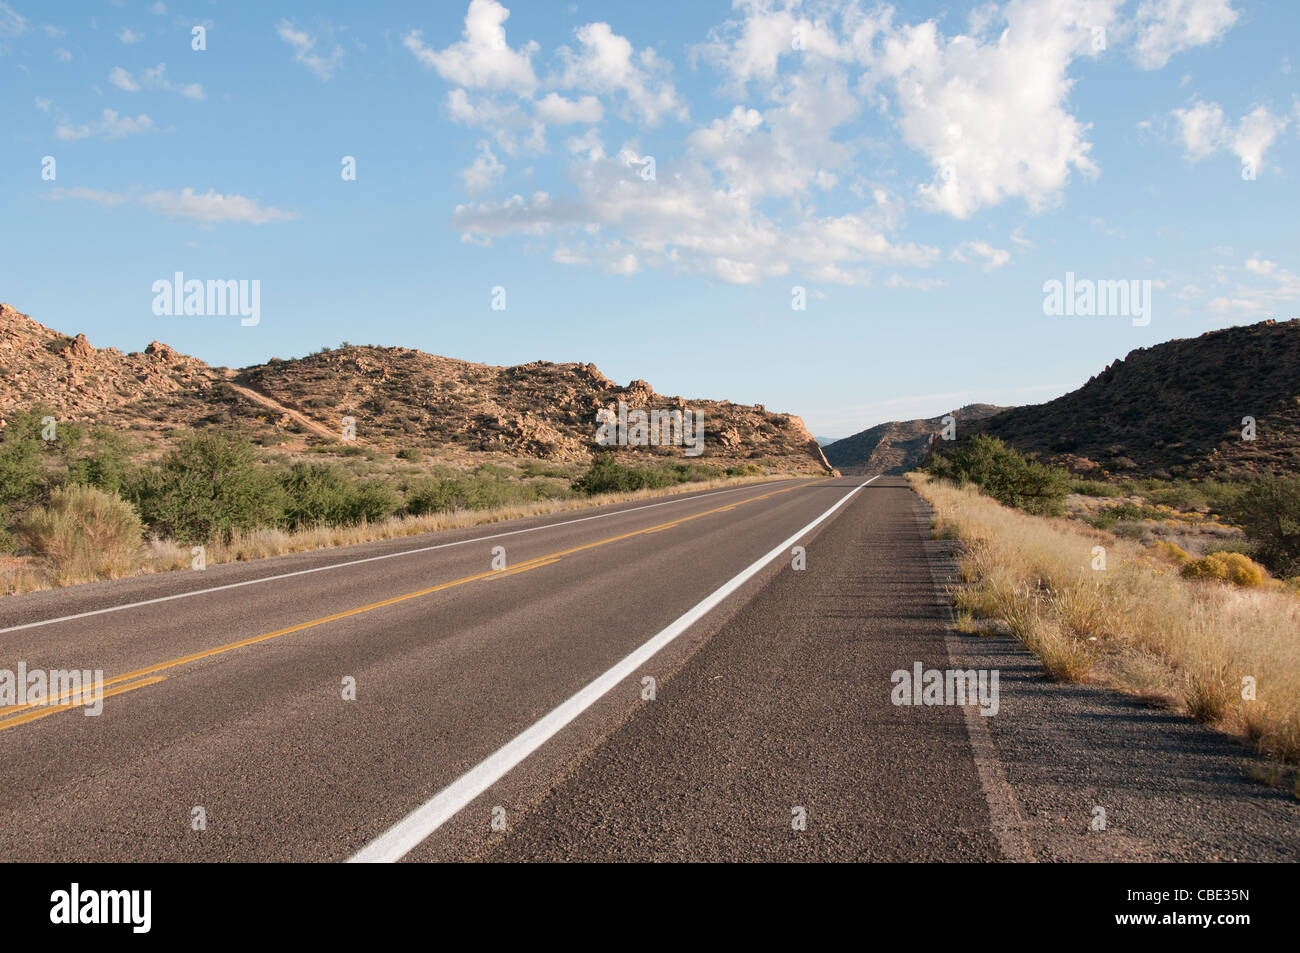 Scenic empty bending mountain road in the hills of Arizona United States Stock Photo